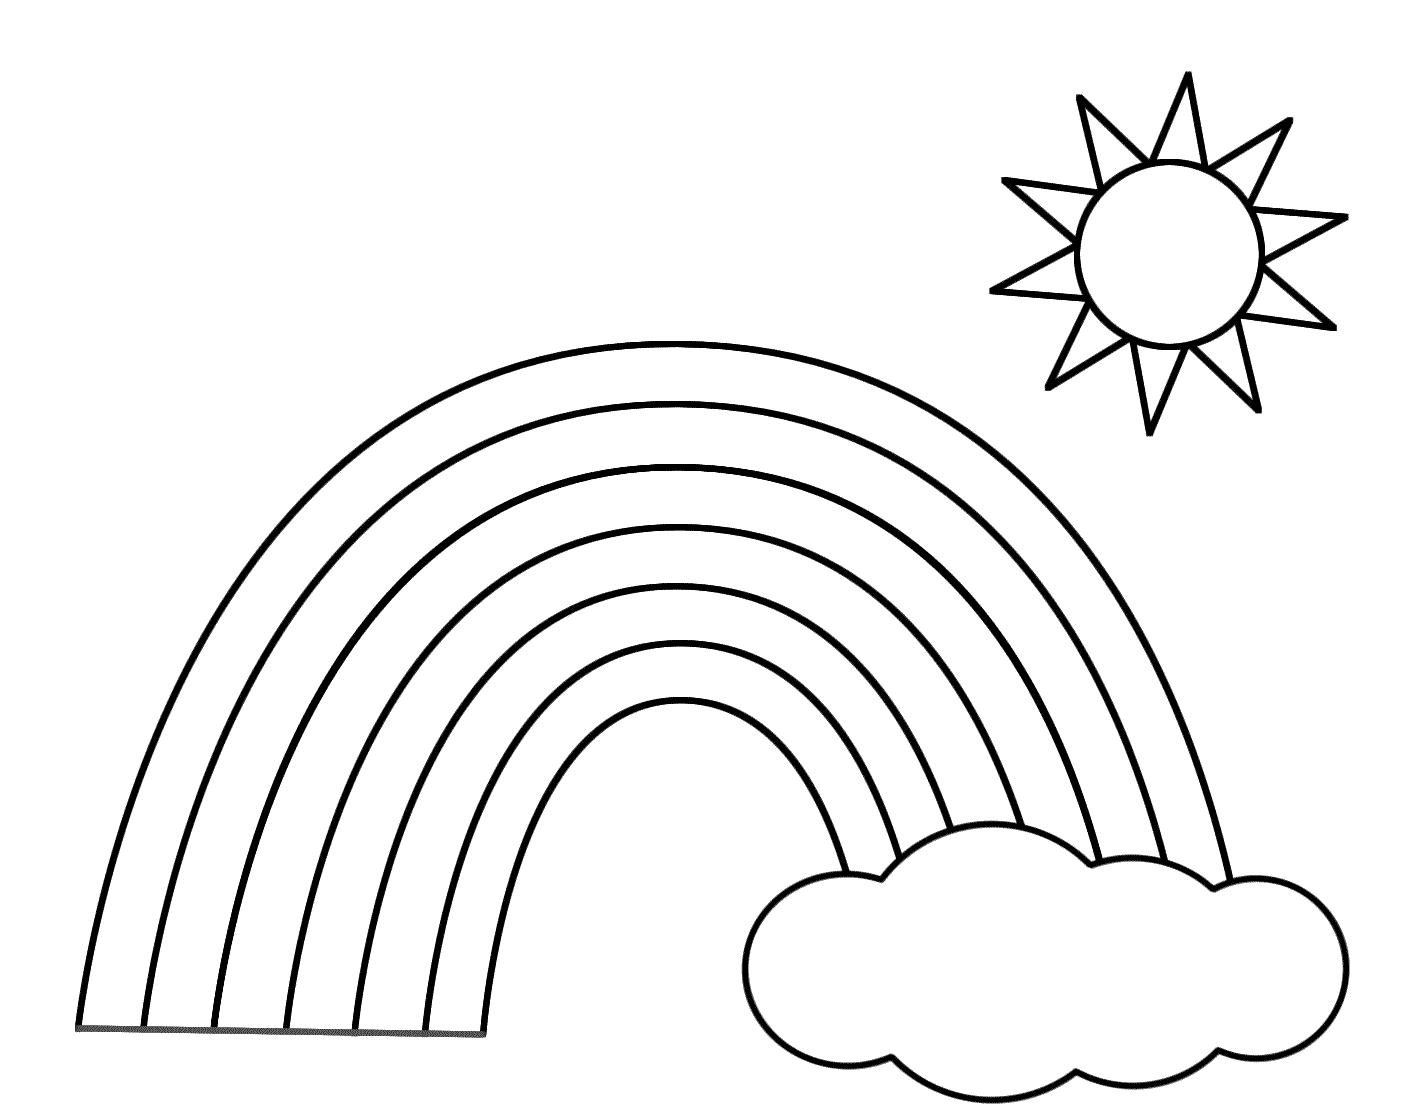 coloring pages rainbow coloring pages for kids rainbow coloring pages rainbow coloring pages 